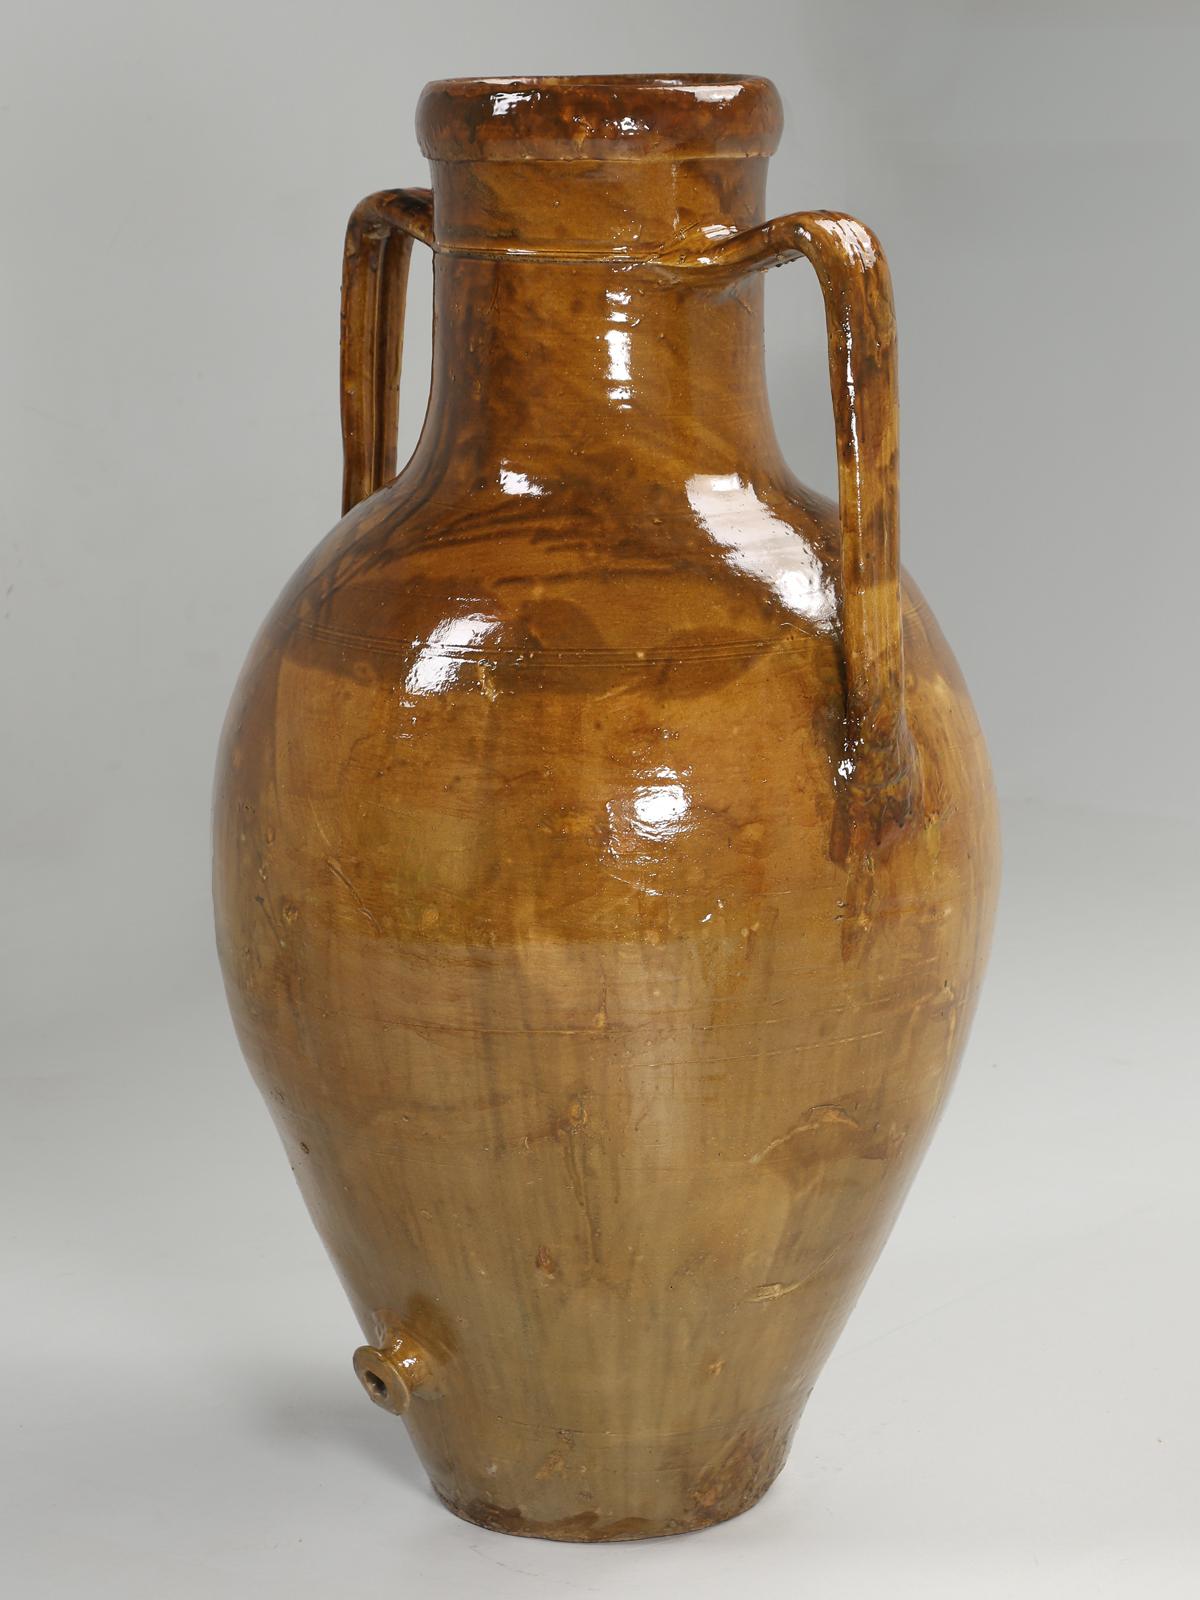 Italian glazed olive oil jar signed and dated 1935. More correctly called amphora jars, which originated from the Neolithic Period between 9000BC to 3500BC. Amphorae were used primarily to transport olive oil and wine. Interior designers and most